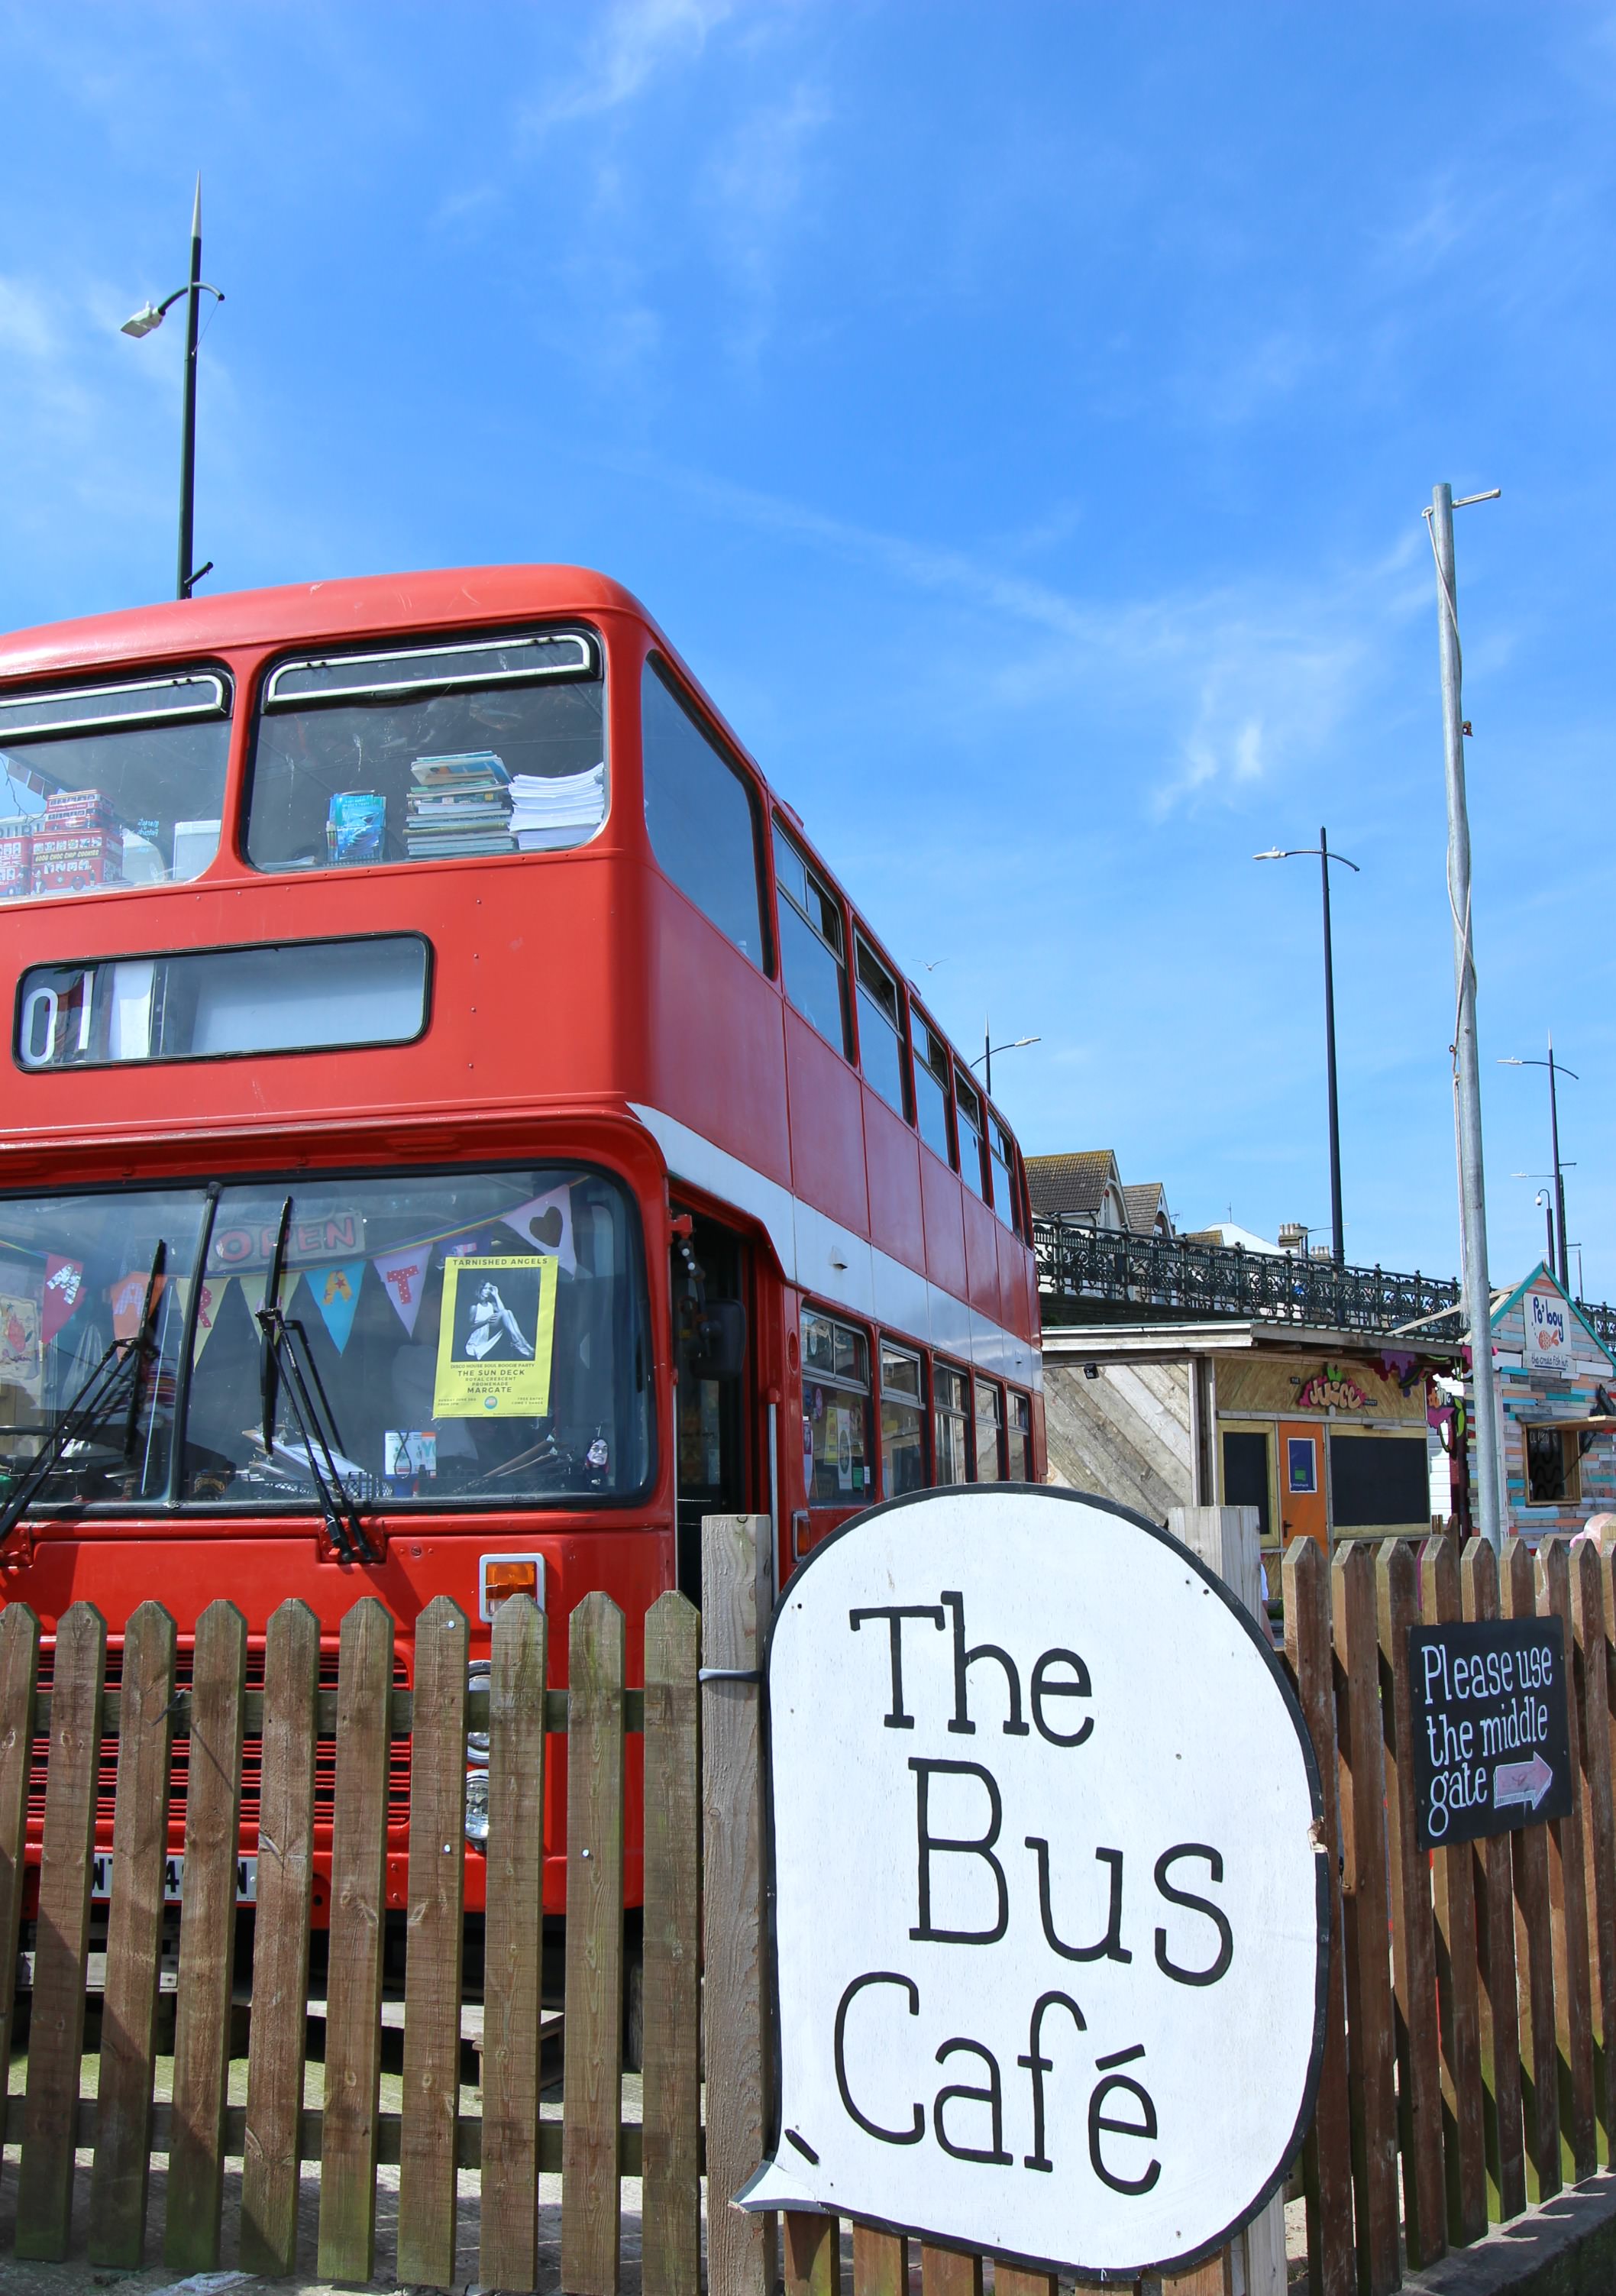 The Bus Cafe in Margate